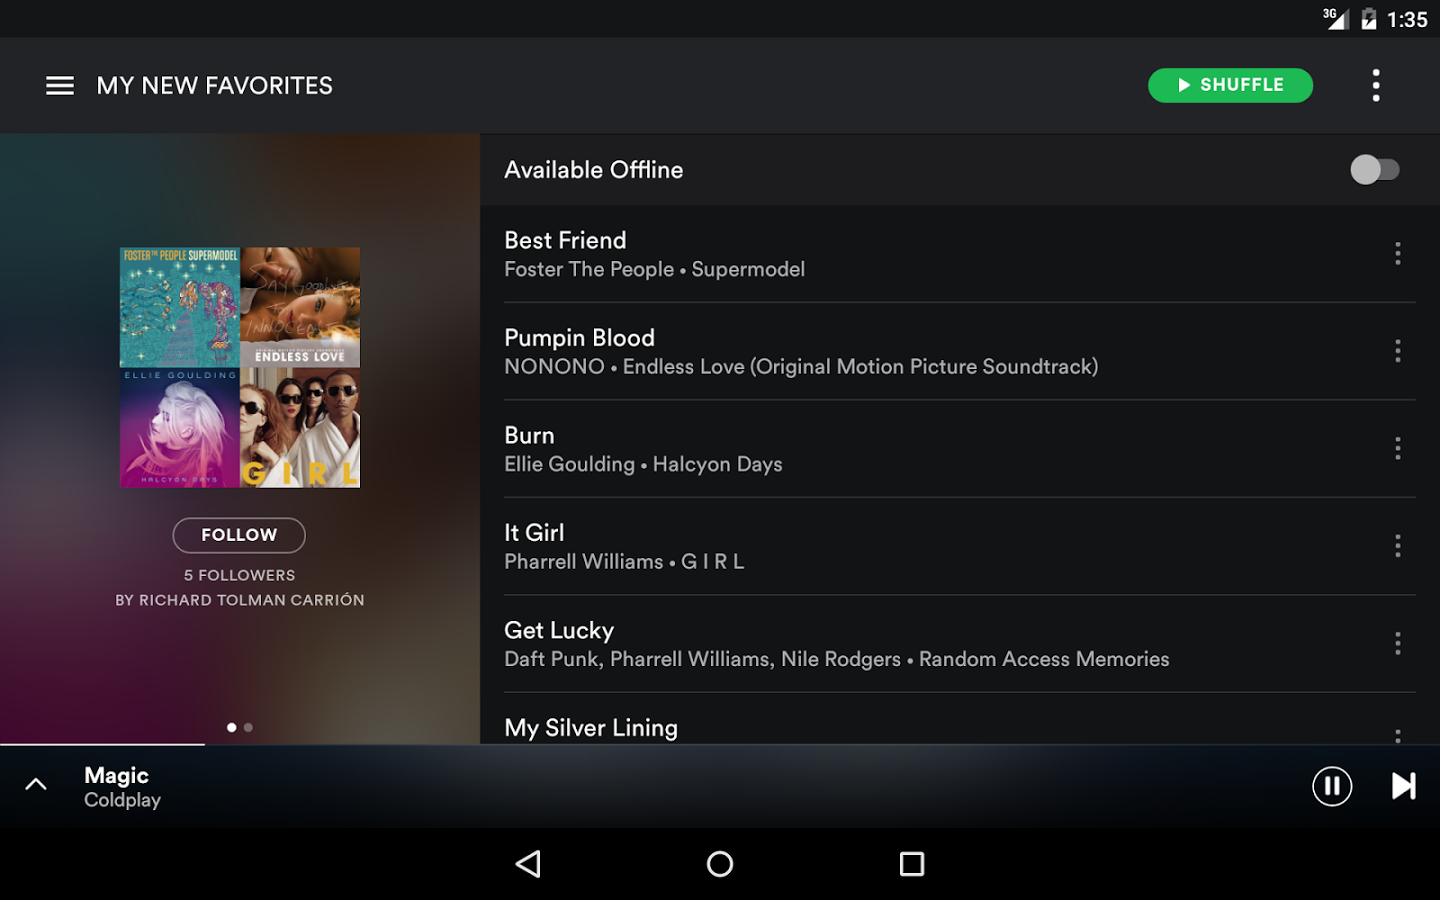 download the last version for android Spotify 1.2.14.1149